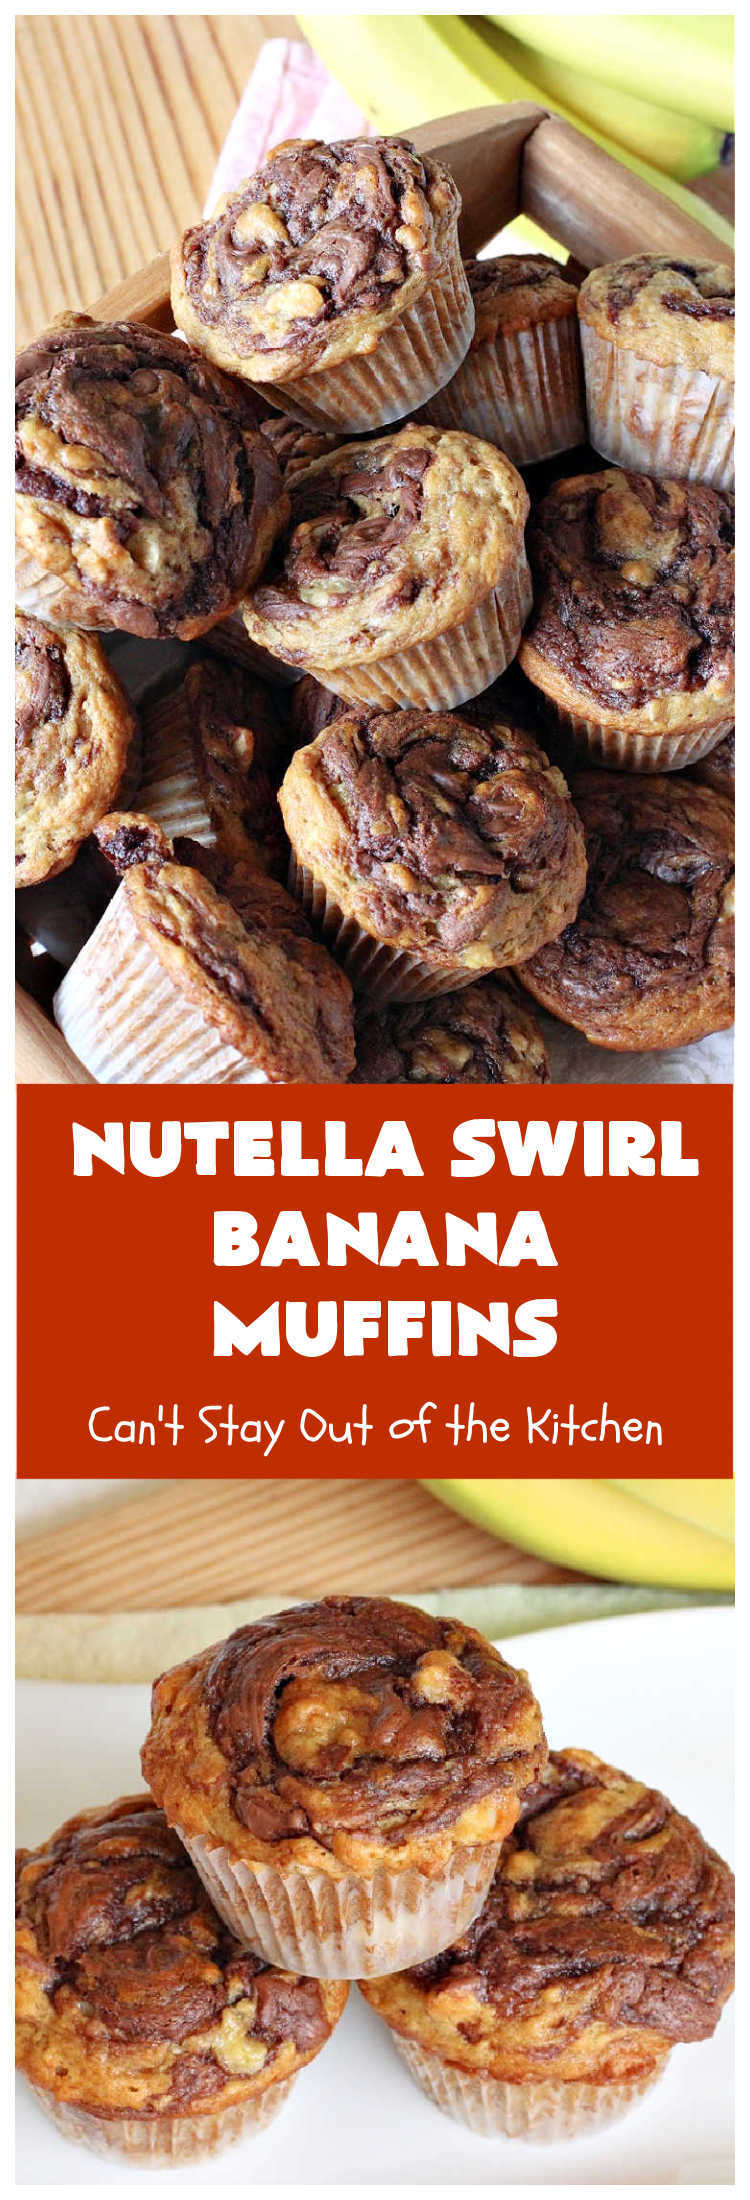 Nutella Swirl Banana Muffins | Can't Stay Out of the Kitchen